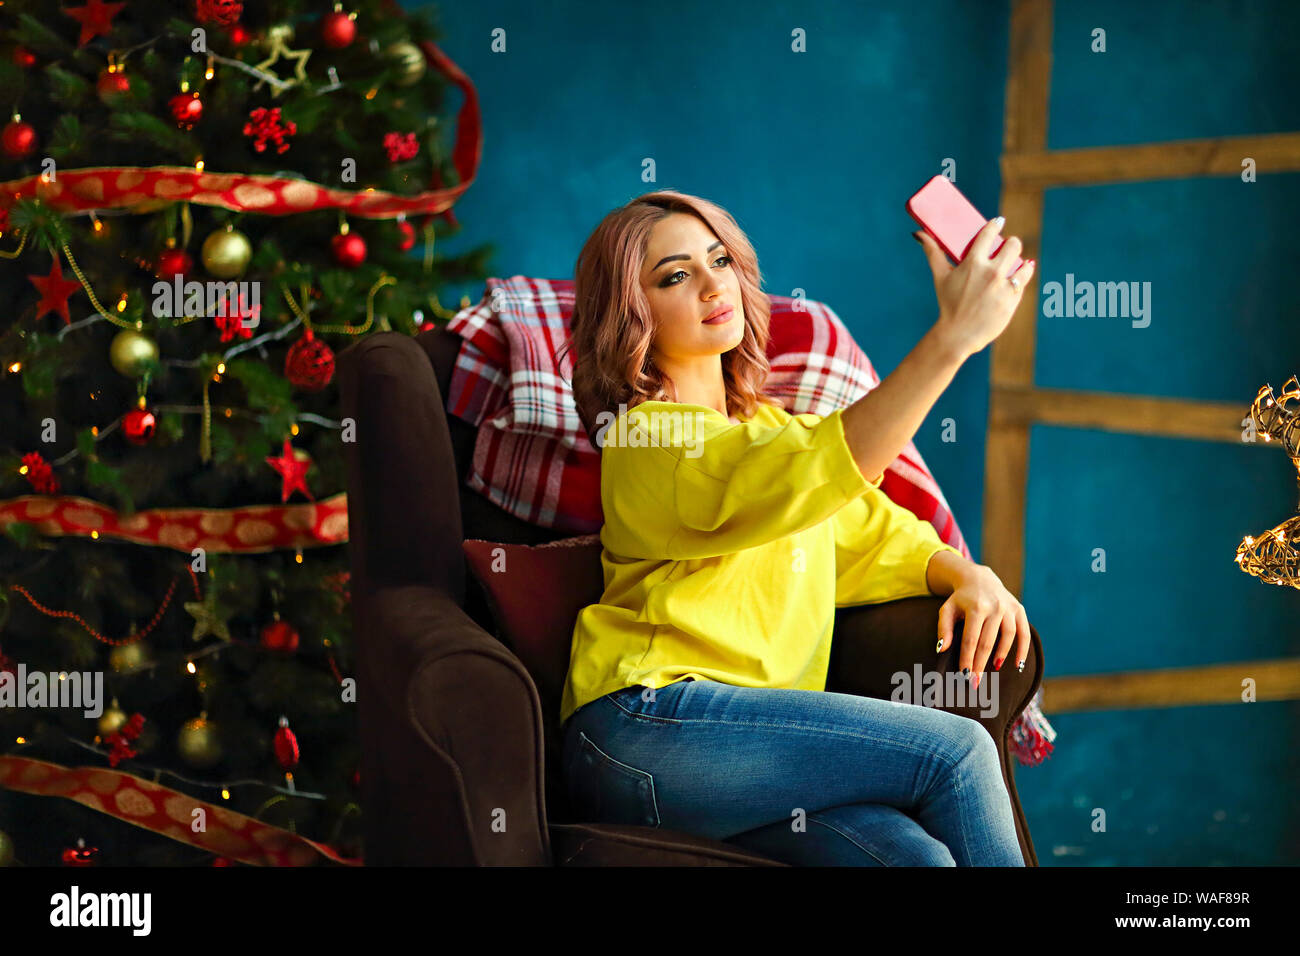 Young pretty woman taking selfie at home while sitting on armchair near Christmas tree Stock Photo